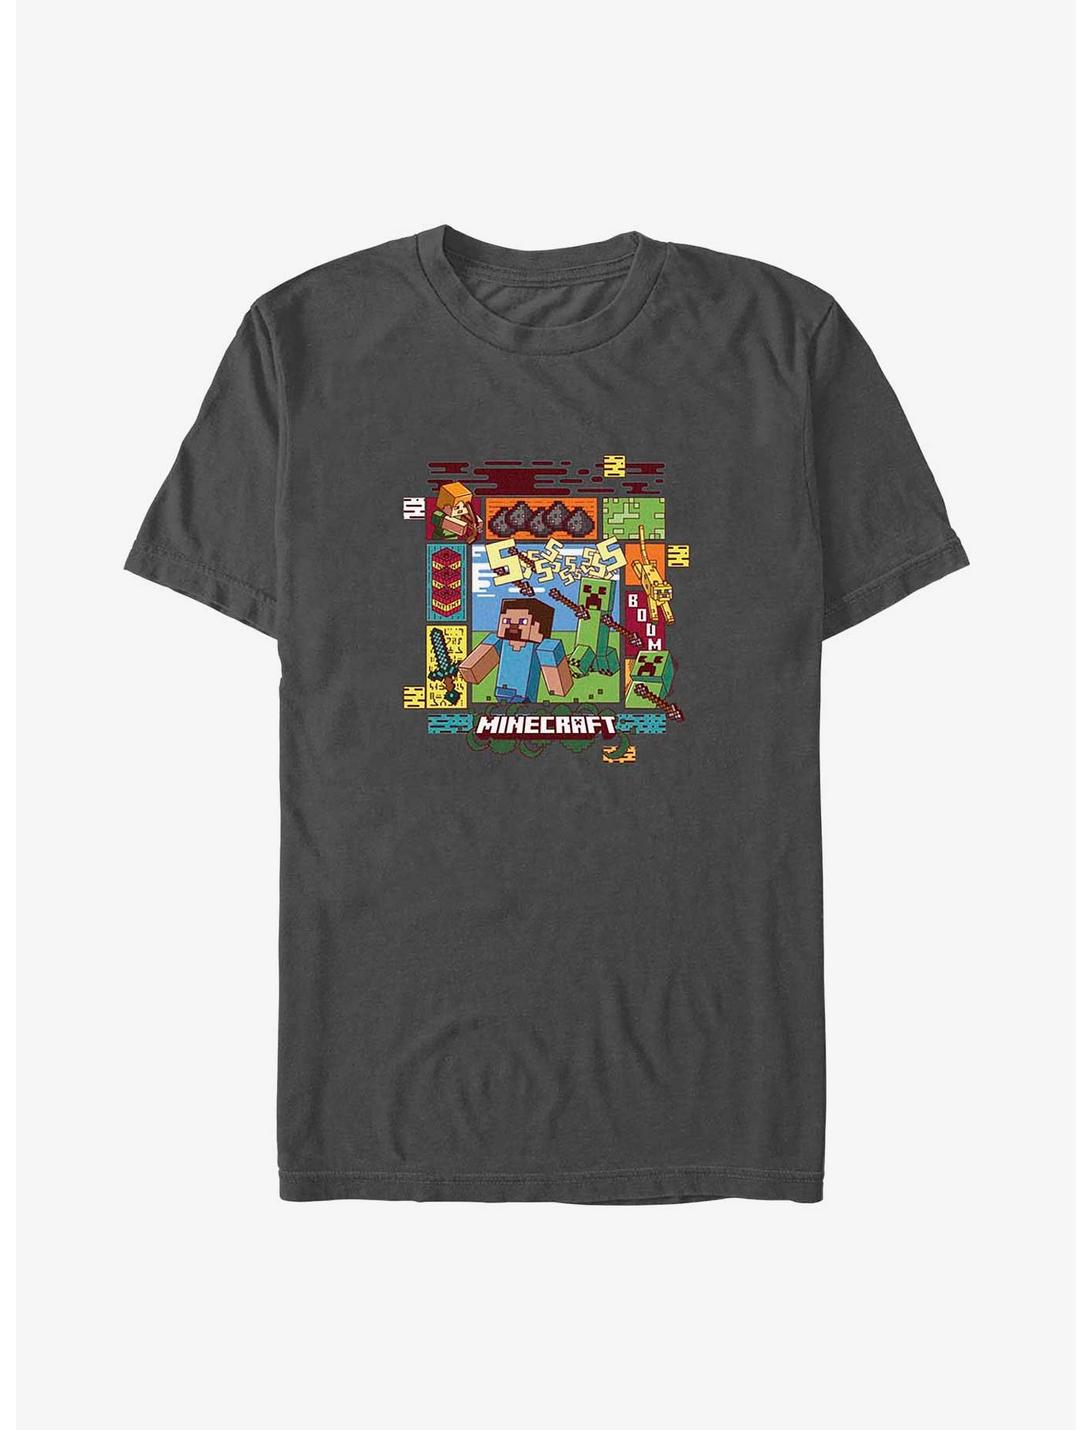 Minecraft Montage T-Shirt, CHARCOAL, hi-res